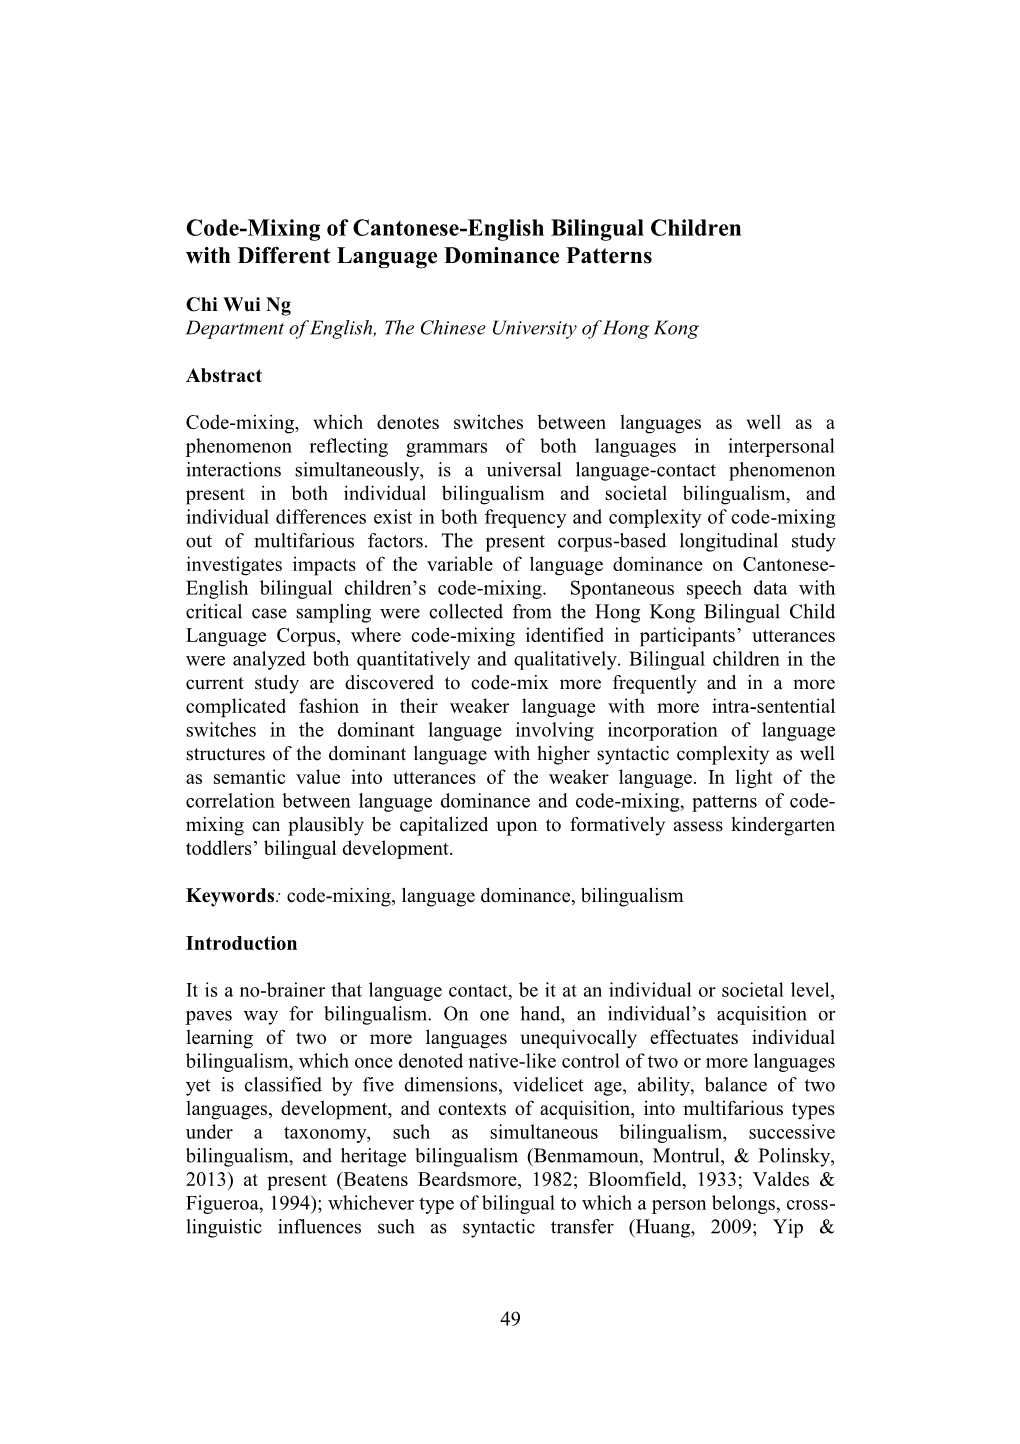 Code-Mixing of Cantonese-English Bilingual Children with Different Language Dominance Patterns